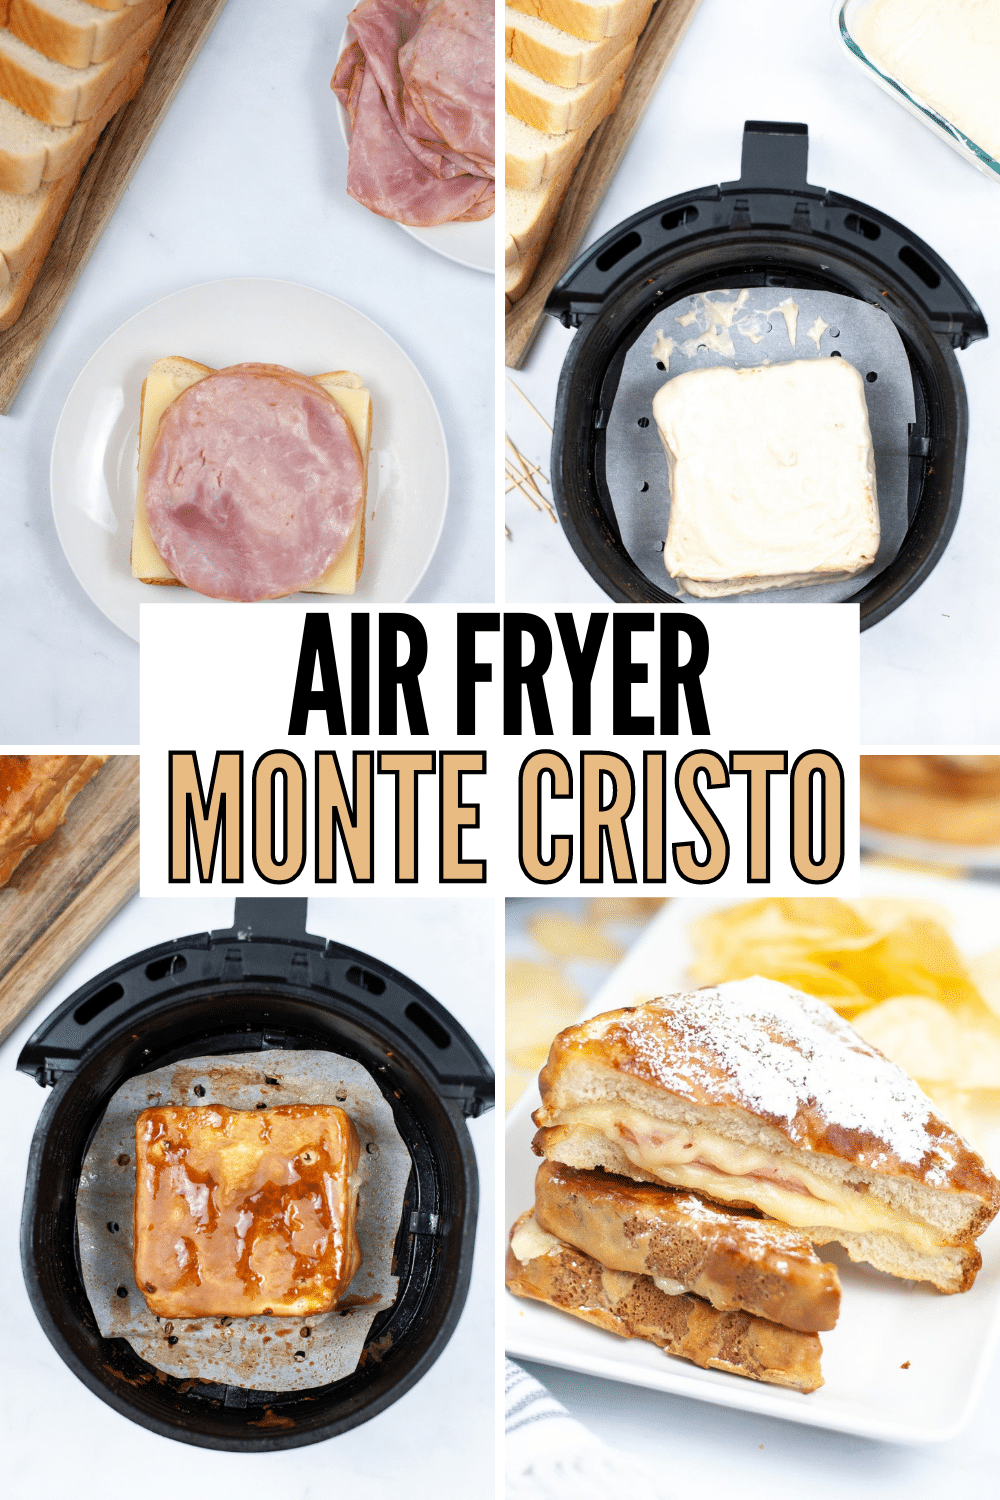 Air Fryer Monte Cristo sandwiches are crispy battered sandwiches filled with ham and melty swiss cheese. This homemade sandwich is delicious! #airfryer #montecristo #sandwich #recipe #hamandcheese via @wondermomwannab